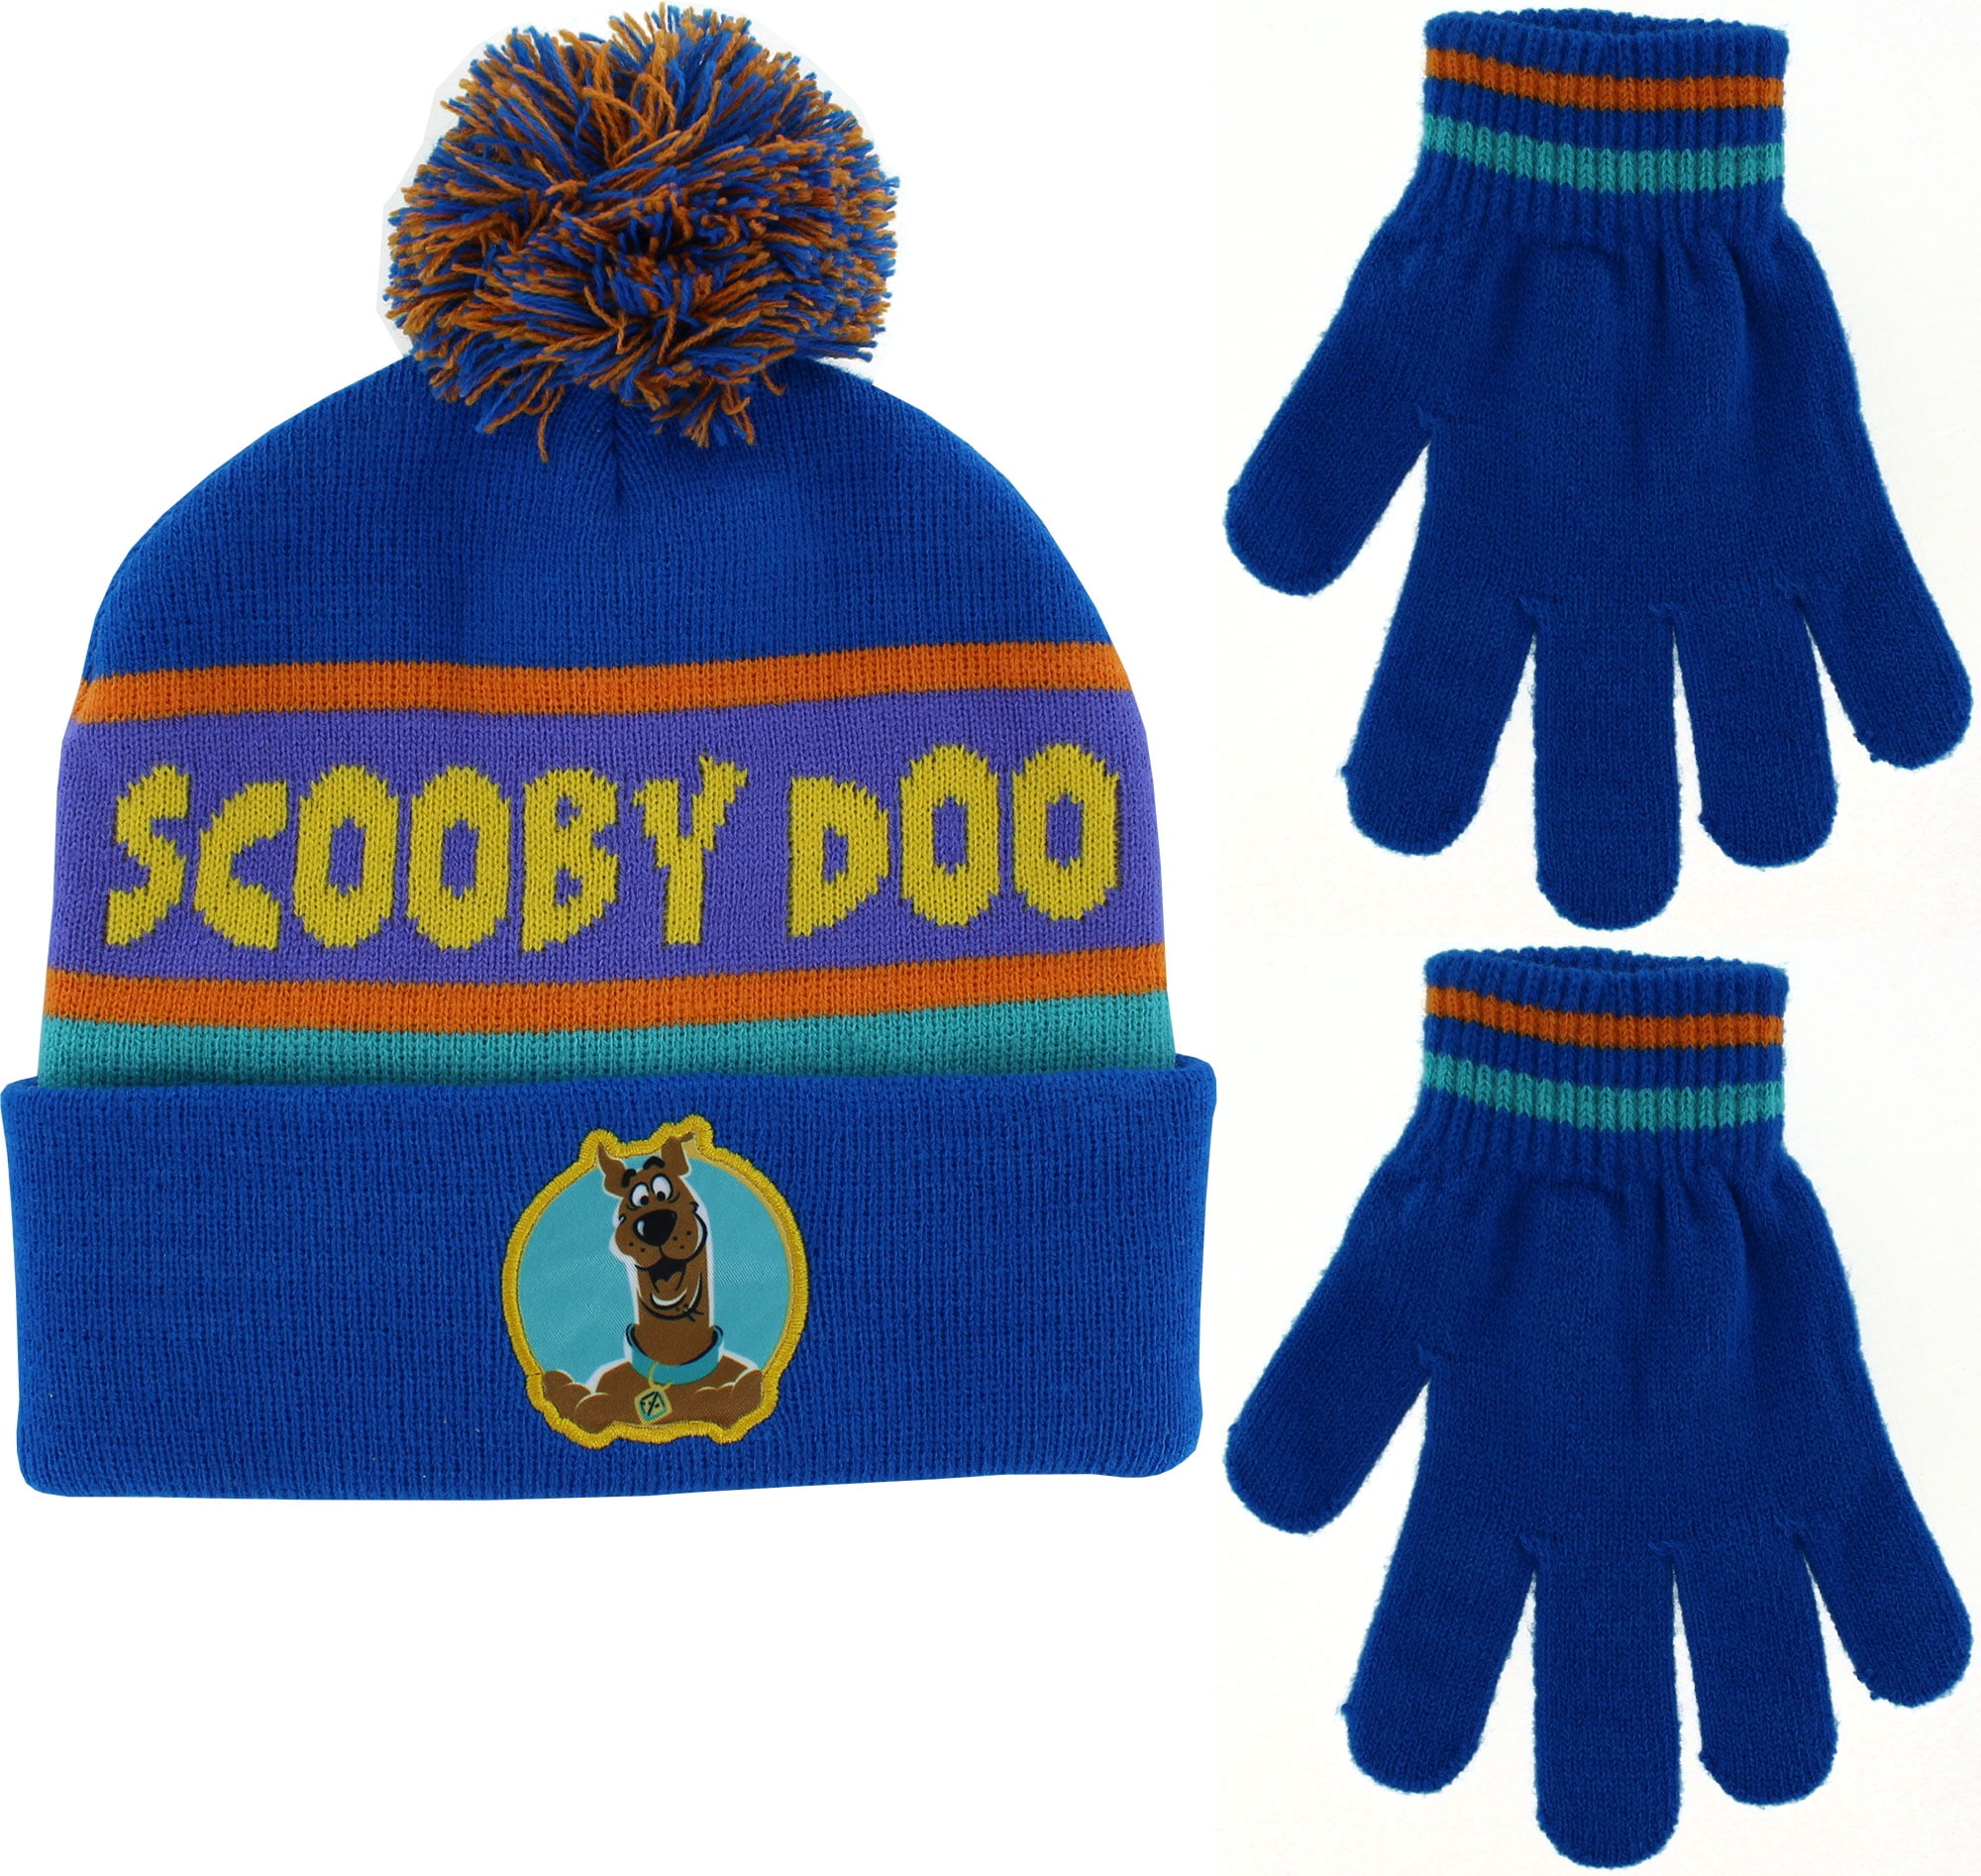 Smart Trend Blue Dog Gloves and Beanie Hat Set Knit Boys Youth One Size 